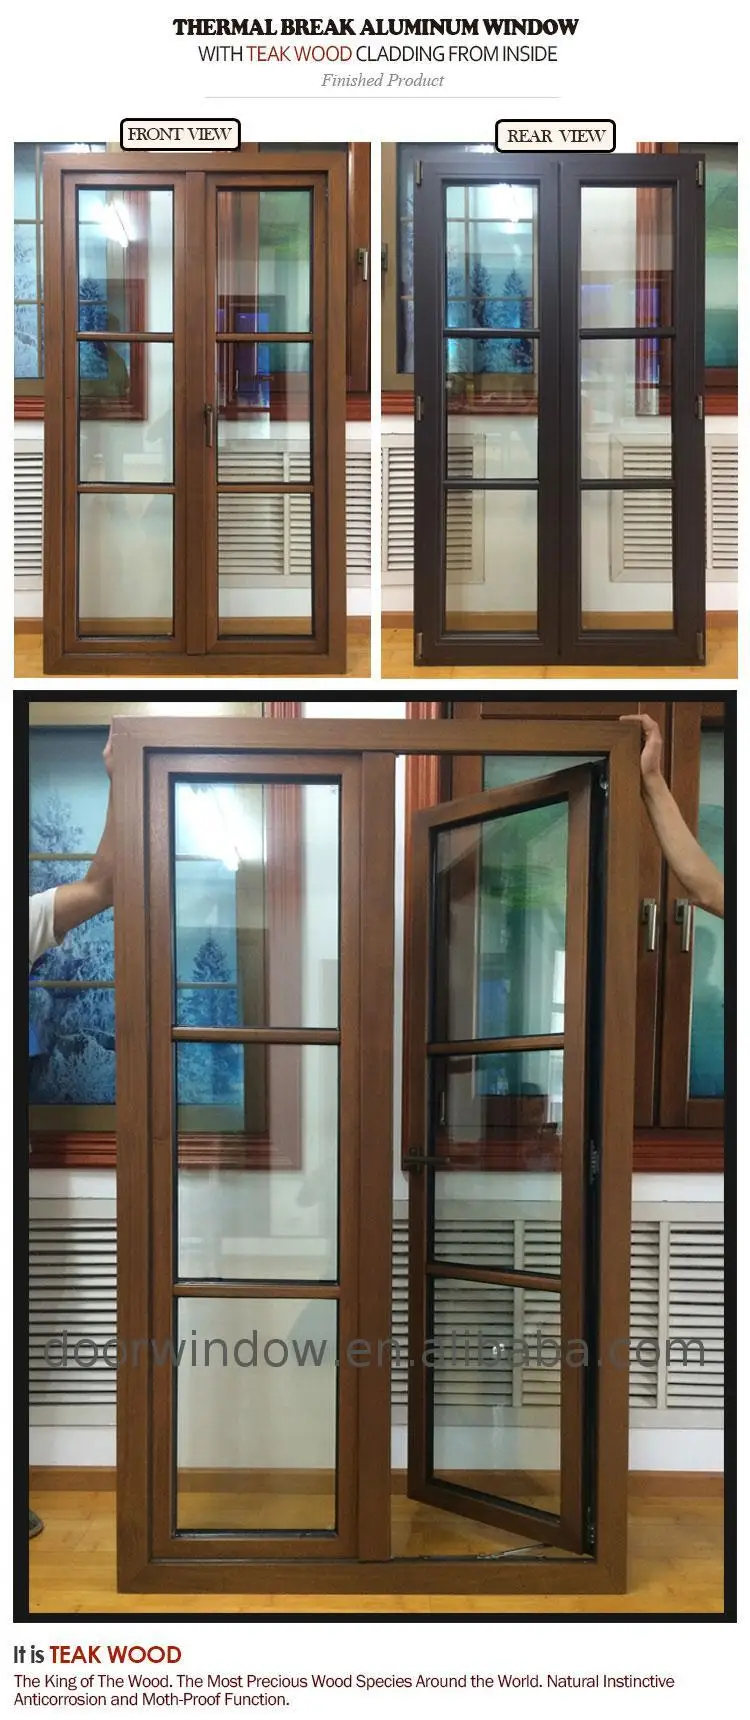 Factory direct selling commercial storefront doors and windows pass through window chicago tilt